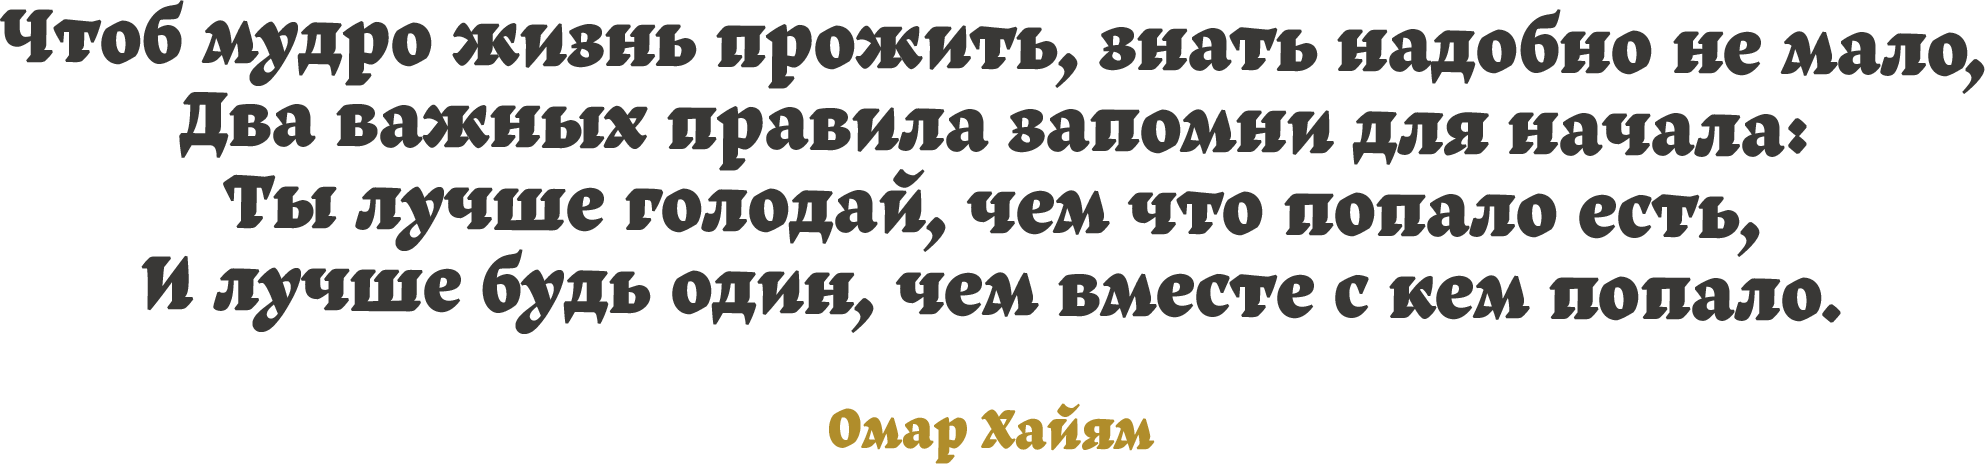 Of wisdom's dictates two are principal, surpassing all your lore traditional; better to fast than eat of every meat, better to live alone than mate with all! In Russian